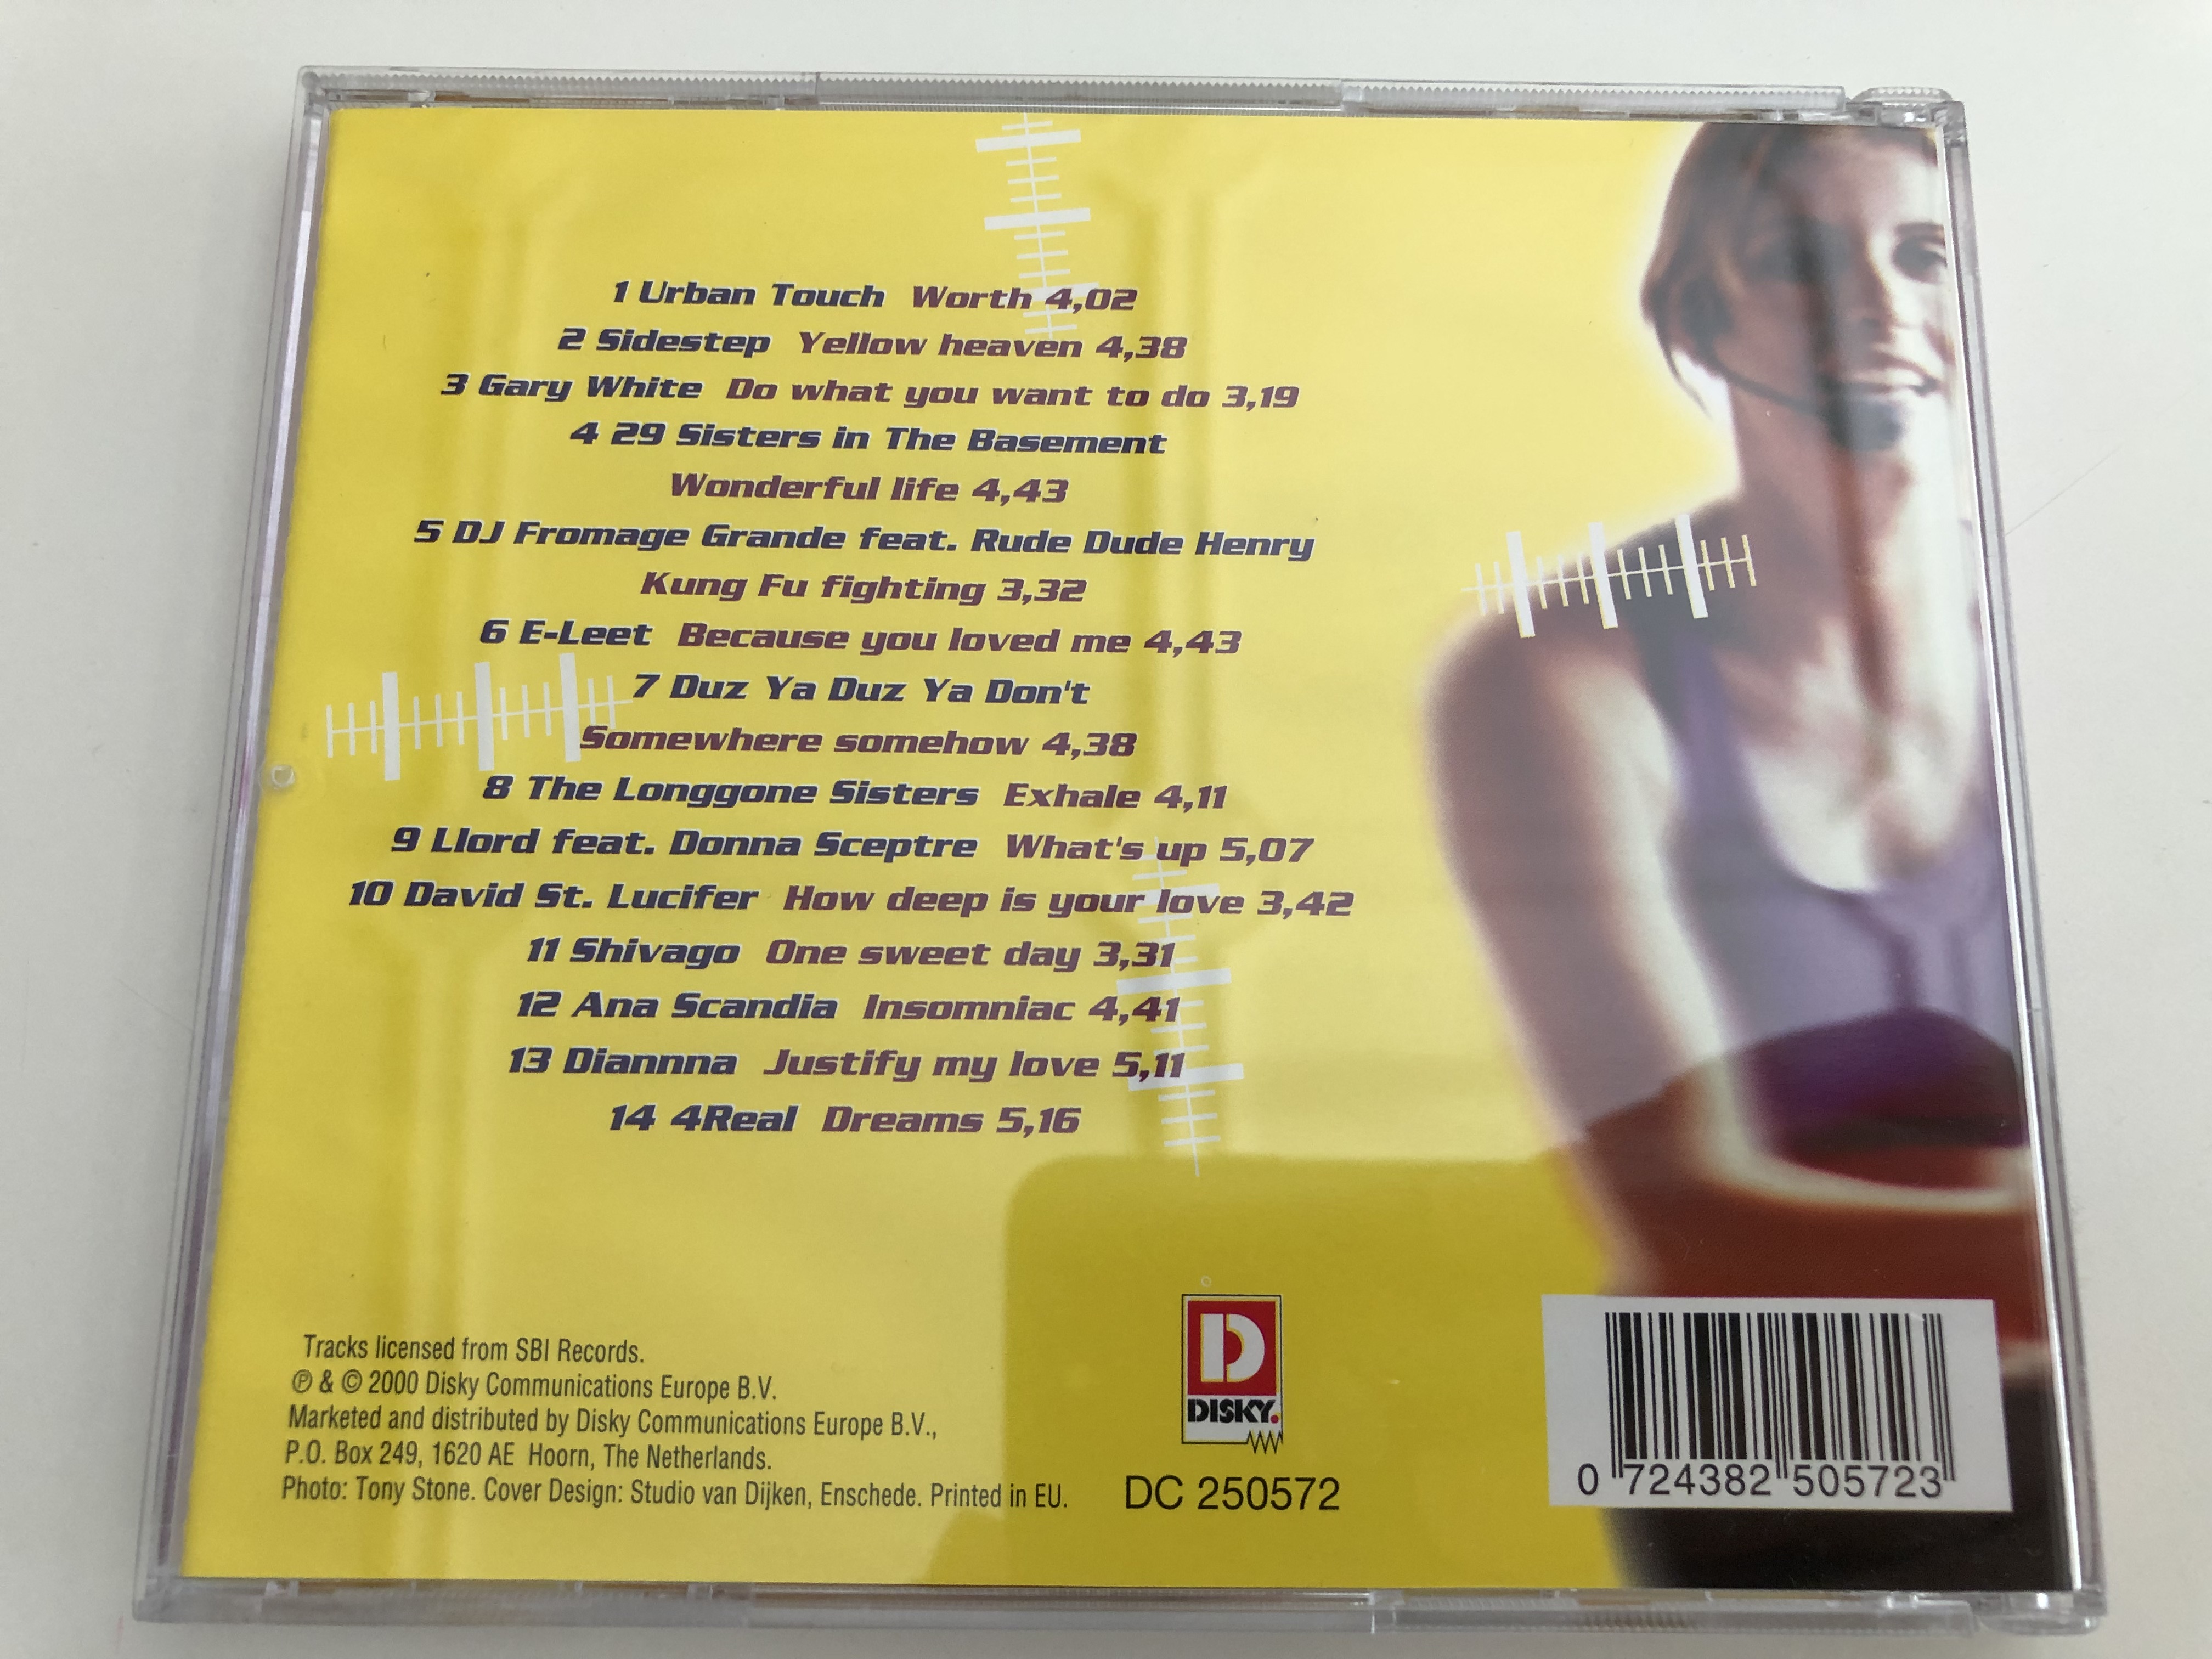 jump-to-the-beat-real-workout-music-including-free-workout-tips-audio-cd-2000-disky-dc-250572-5-.jpg